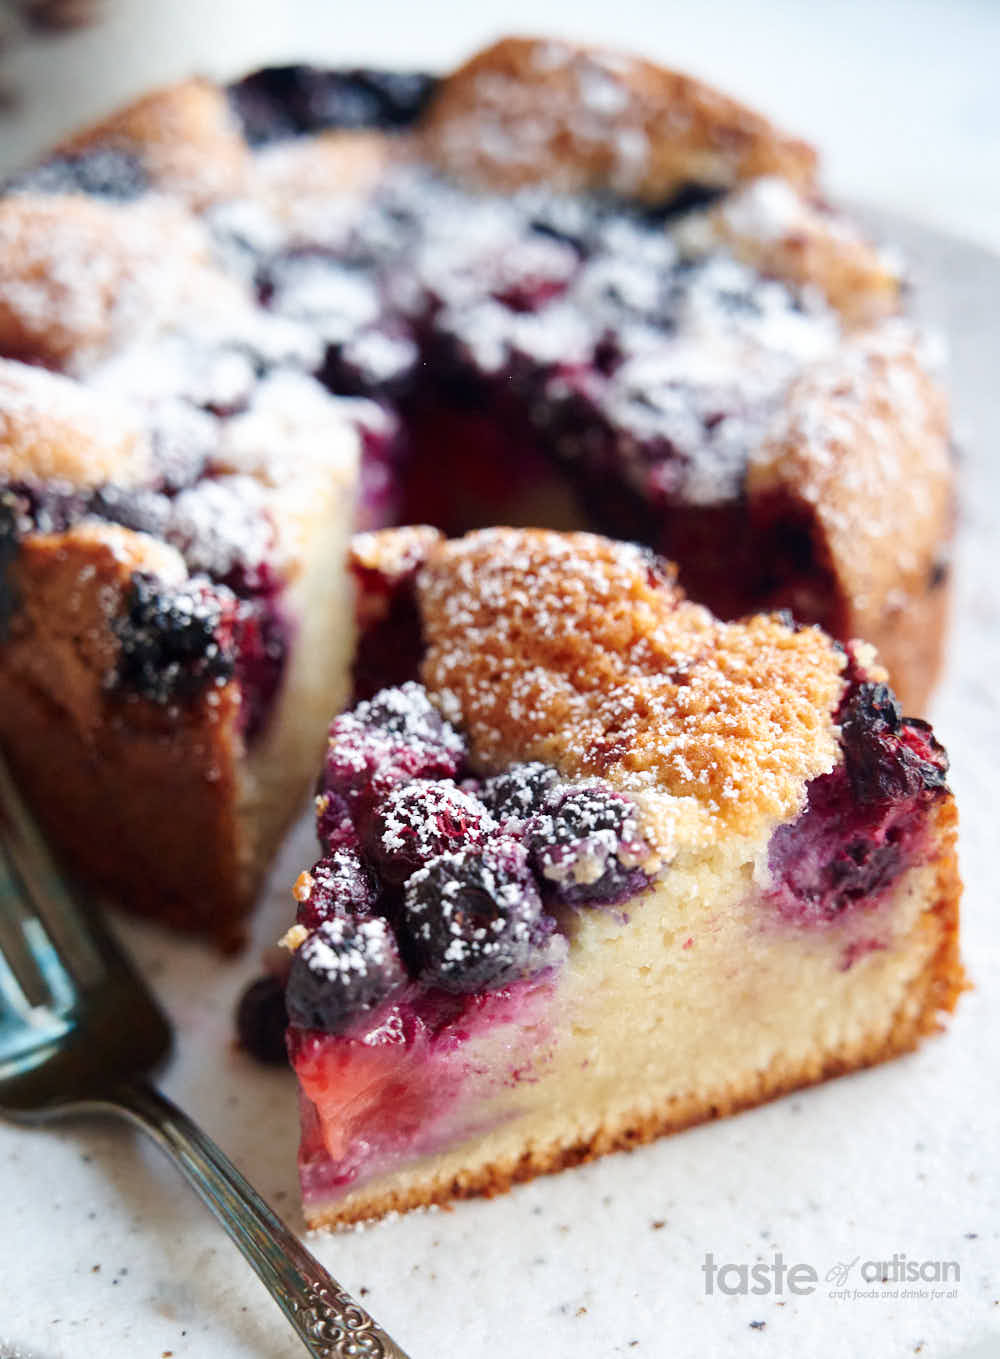 A slice of berry cake on a plate.